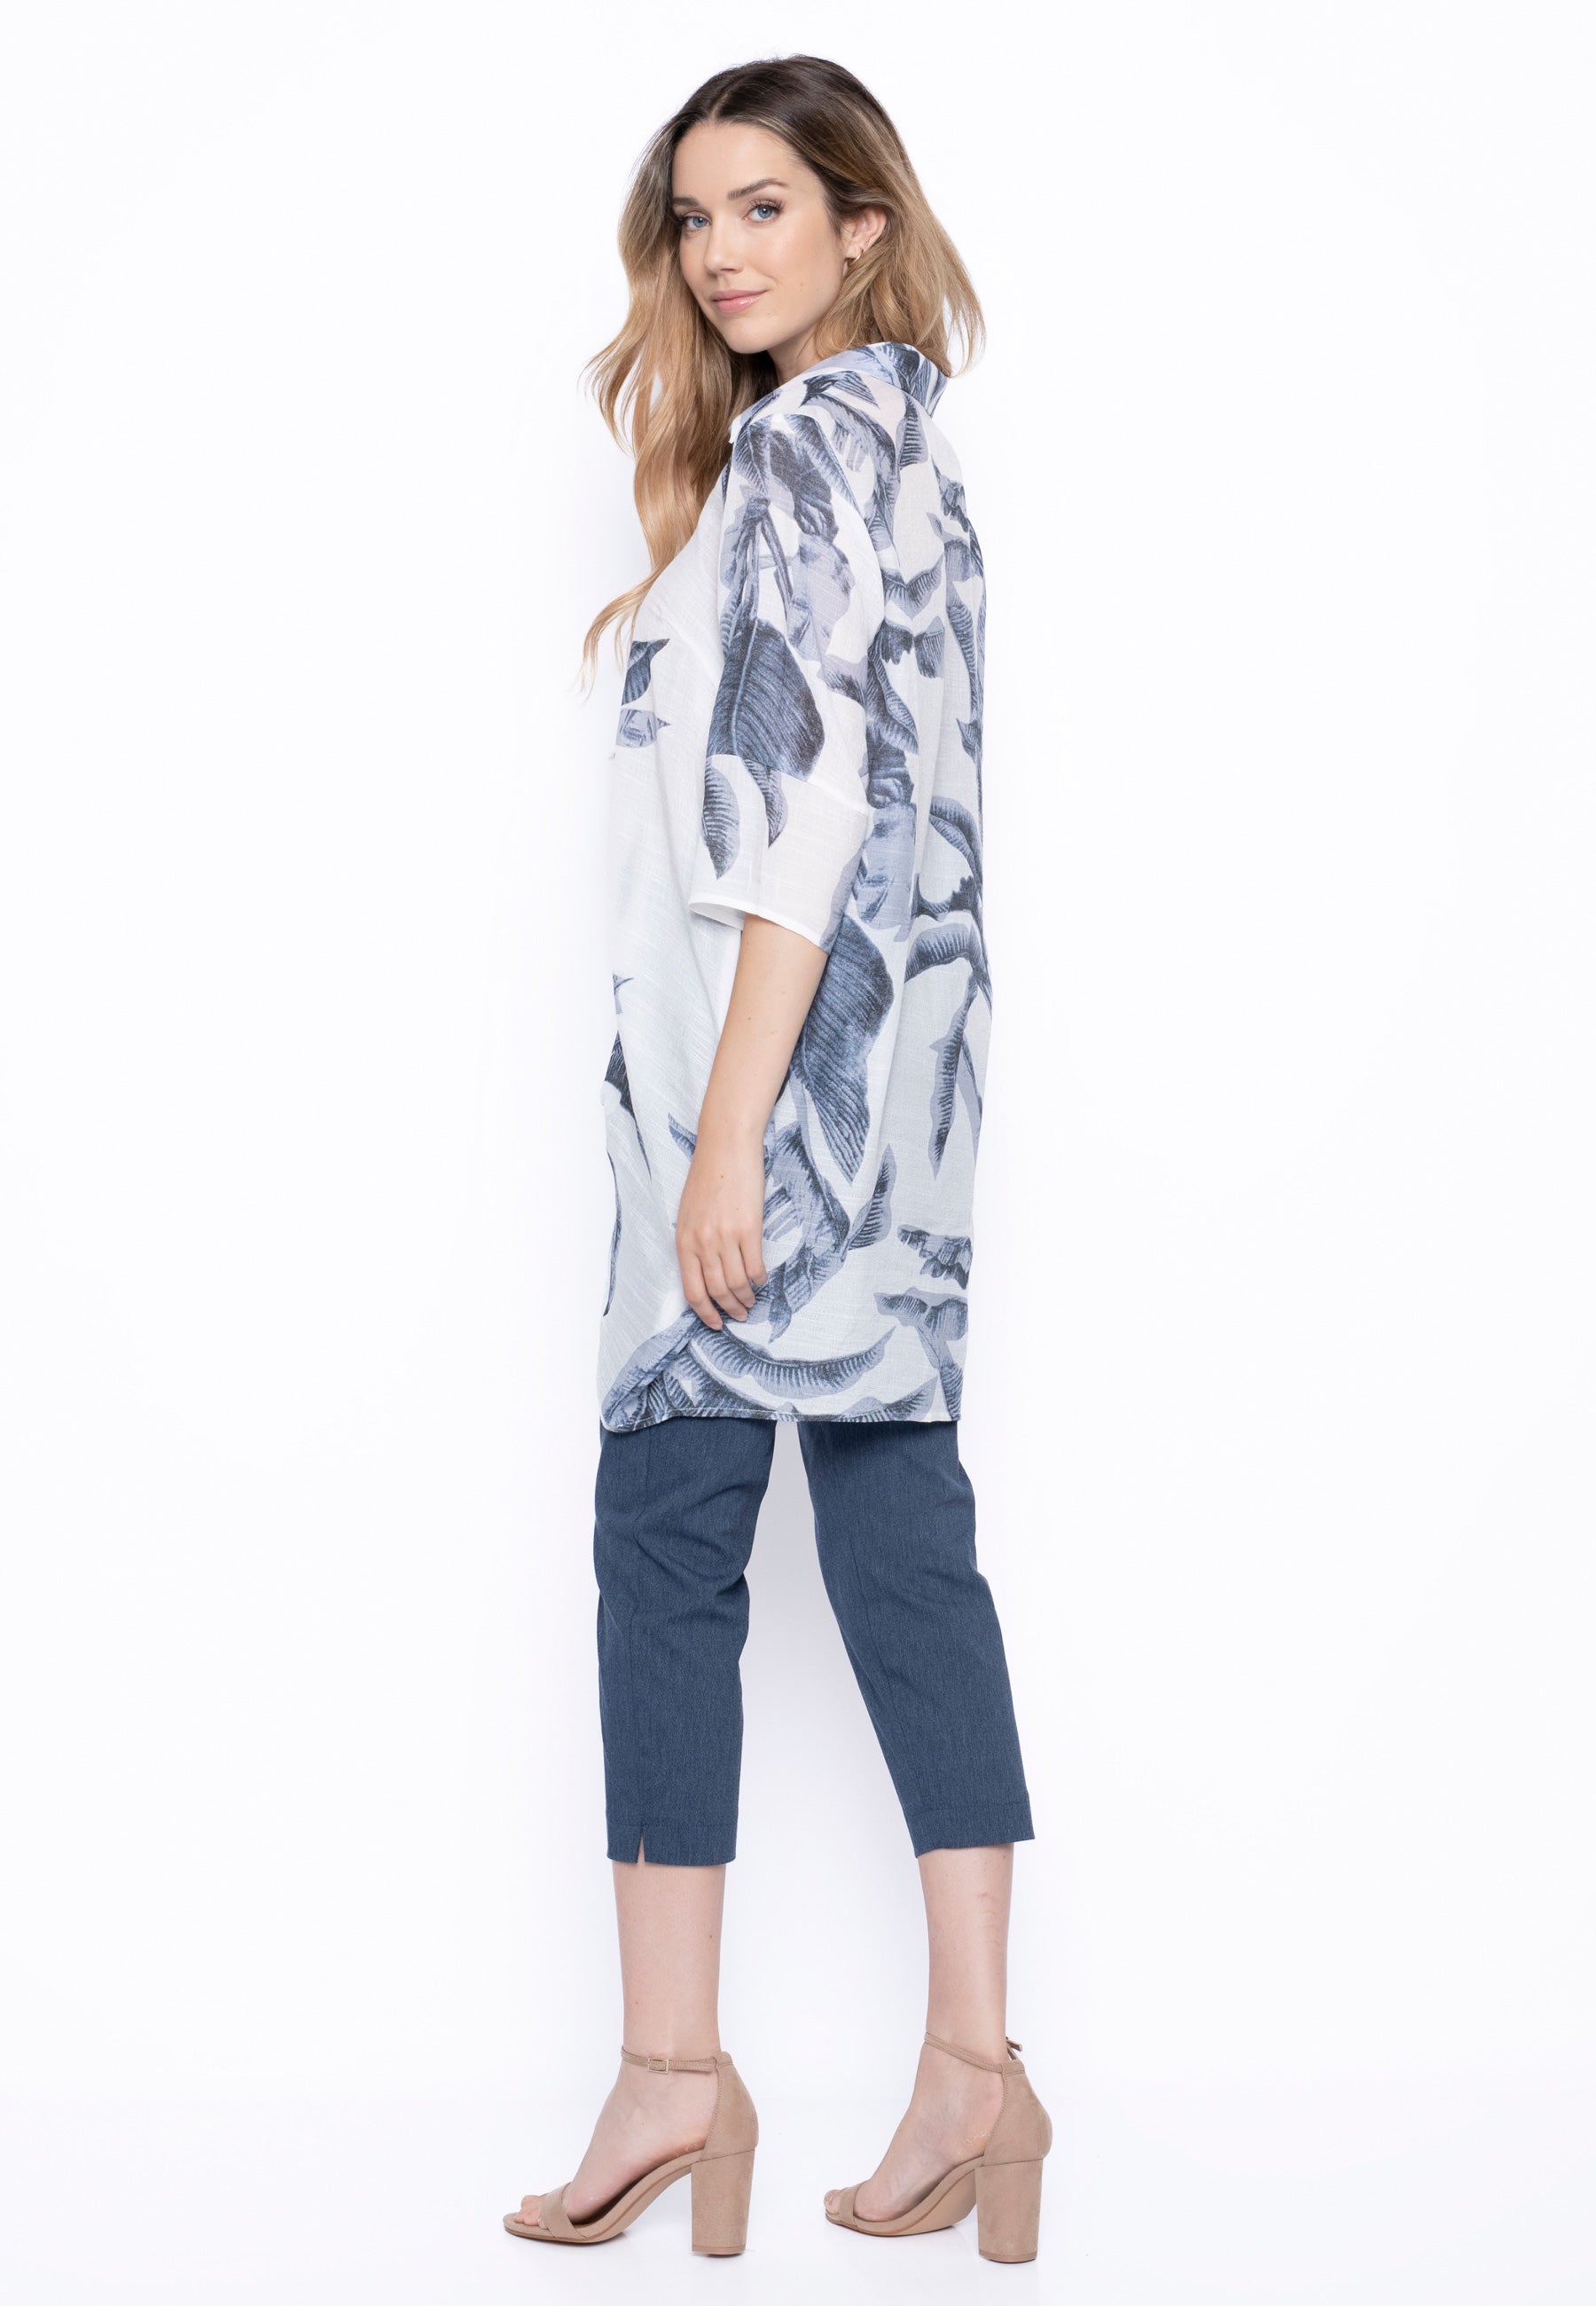 The model is wearing the Donna Long Shirt with denim-colored pants.